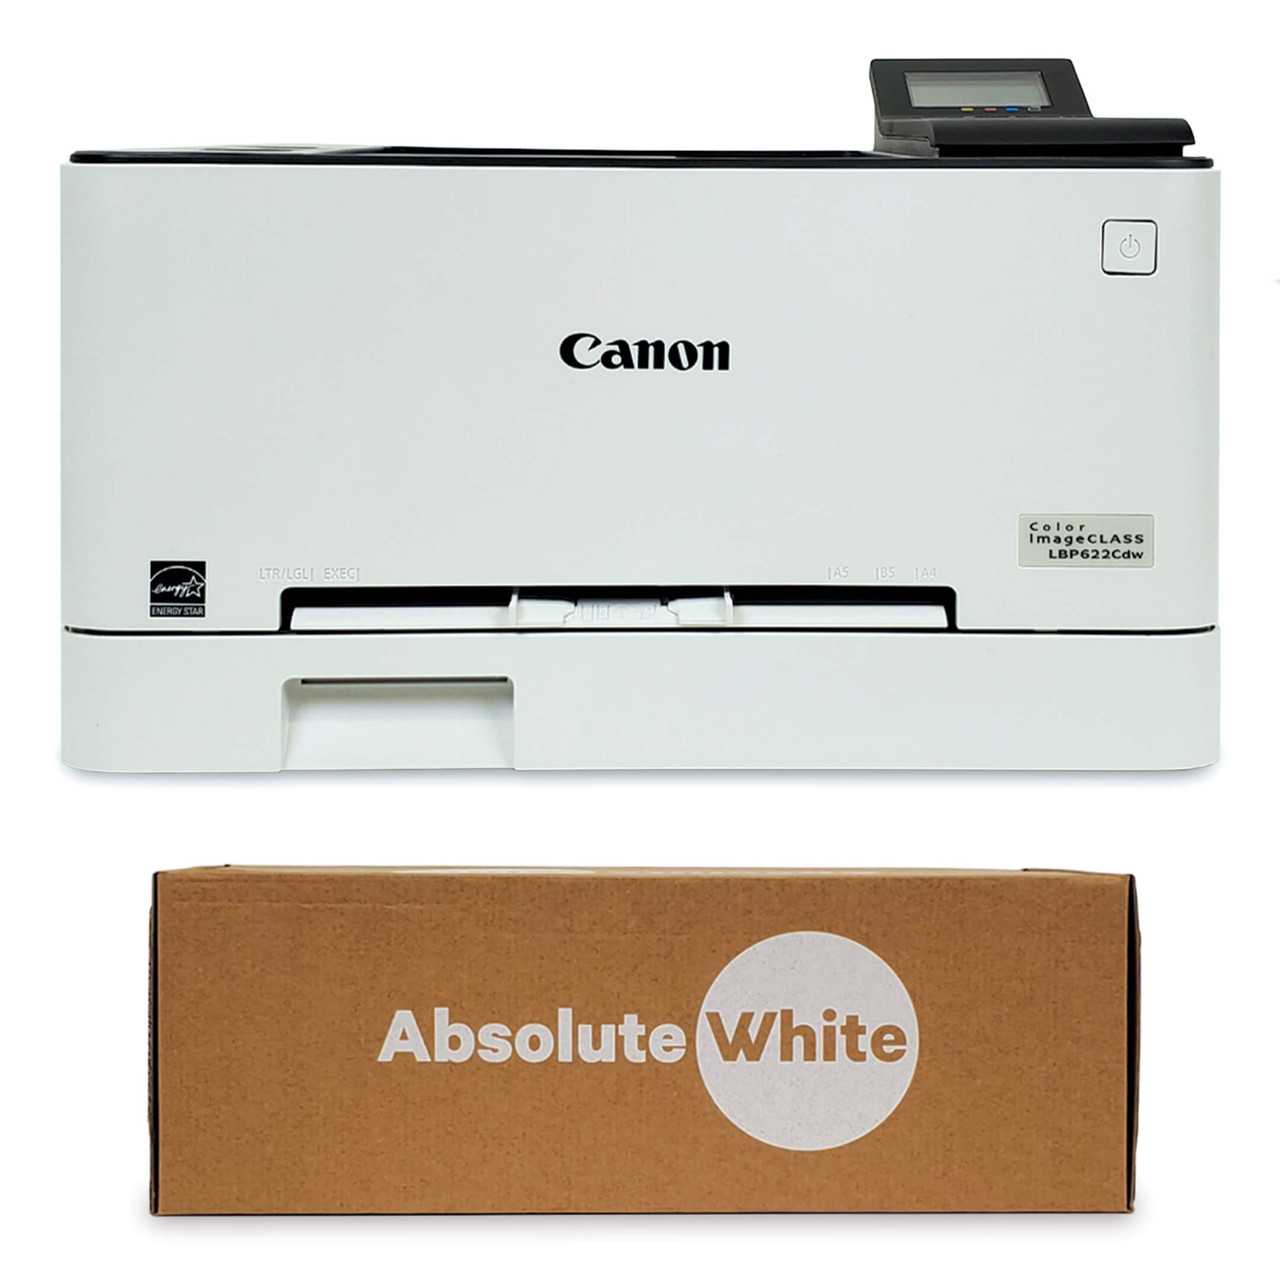 Canon LBP622CDW Color Printer with Absolute White Bundle